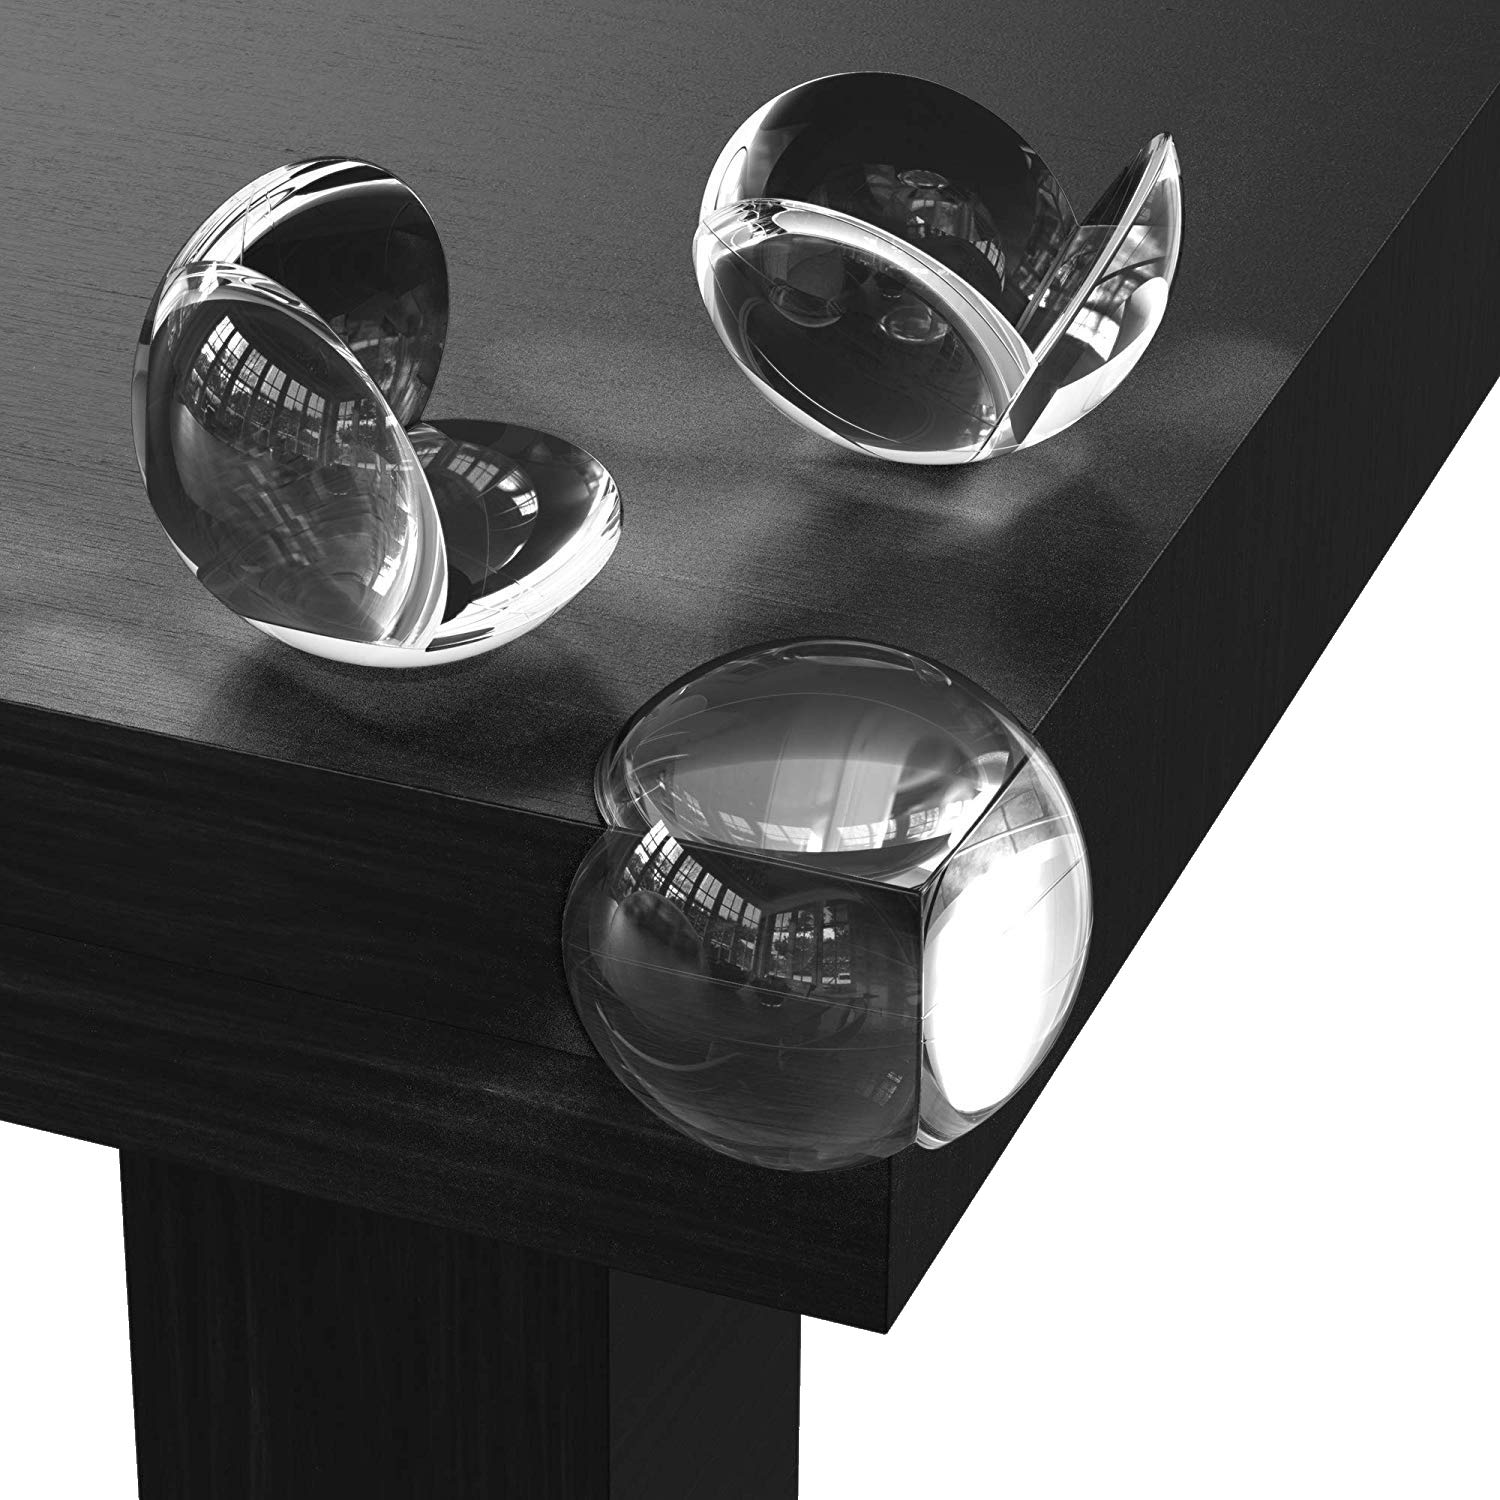 9 Best Table Corner Protectors 2023 - Review & Buying Guide 5